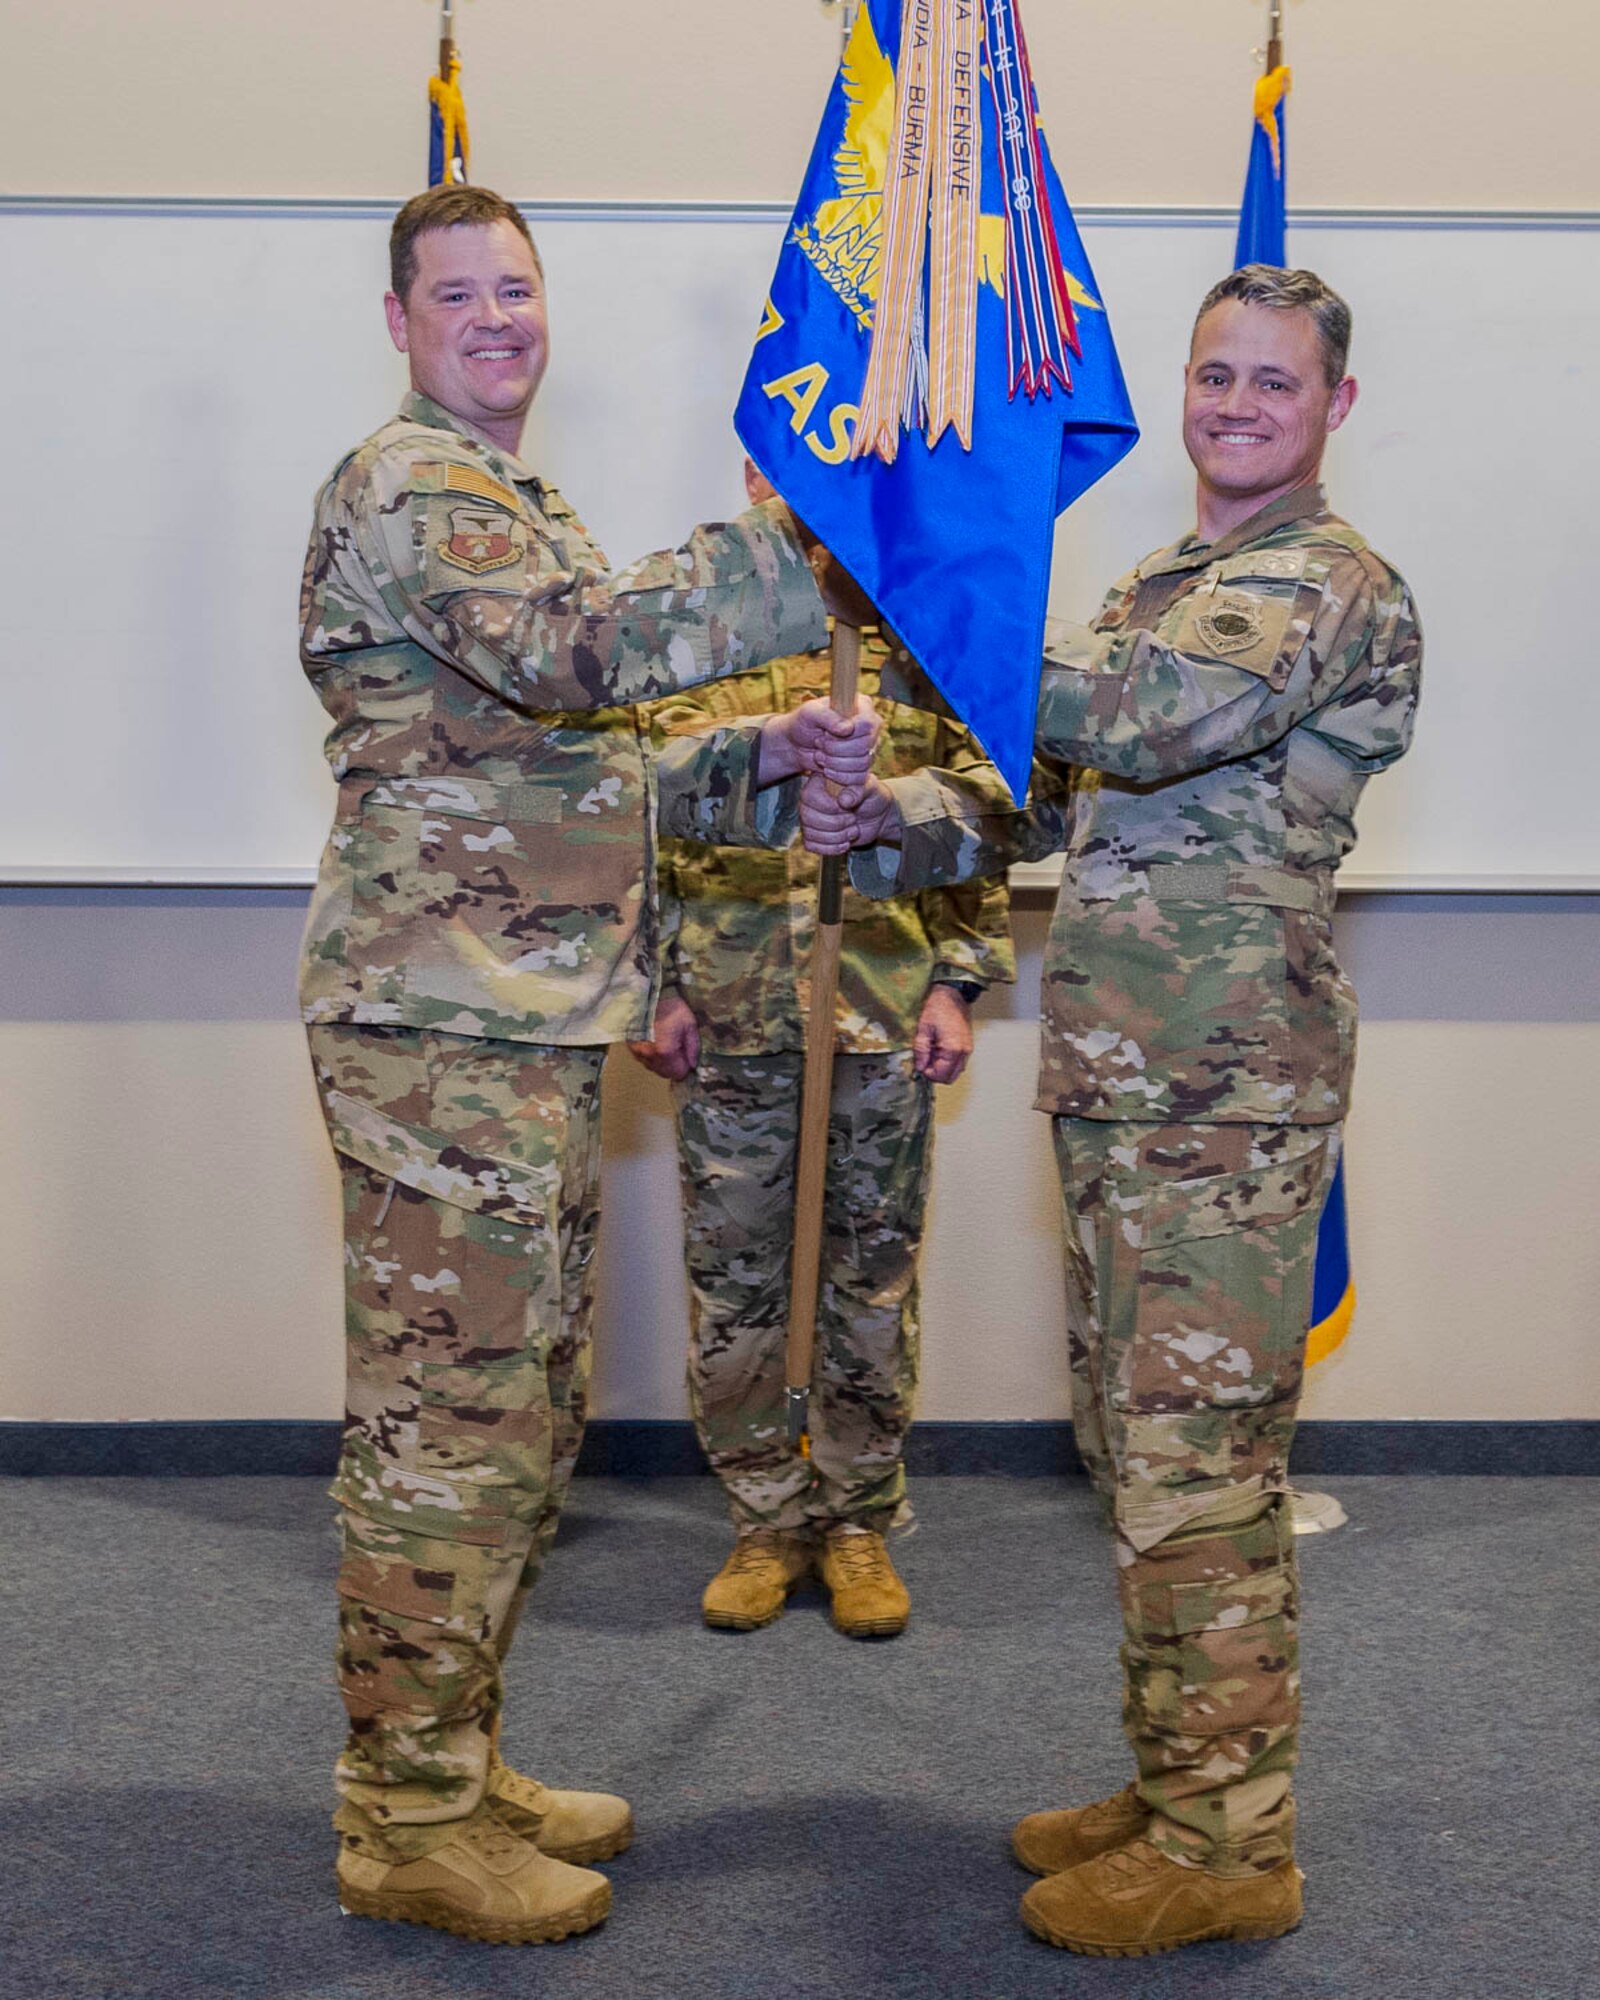 913th Airlift Group deputy commander Col. Daniel Collister (left) passes the guidon to 327th Airlift Squadron commander Lt. Col. Jeremy Wagner during the assumption of command ceremony at Little Rock Air Force Base, Ark. Nov. 3, 2019. Previous to his command, Lt. Col. Wagner was the chief pilot for the squadron who has more than 2,800 hours in the C-130. (U.S. Air Force Reserve photo by Maj. Ashley Walker)